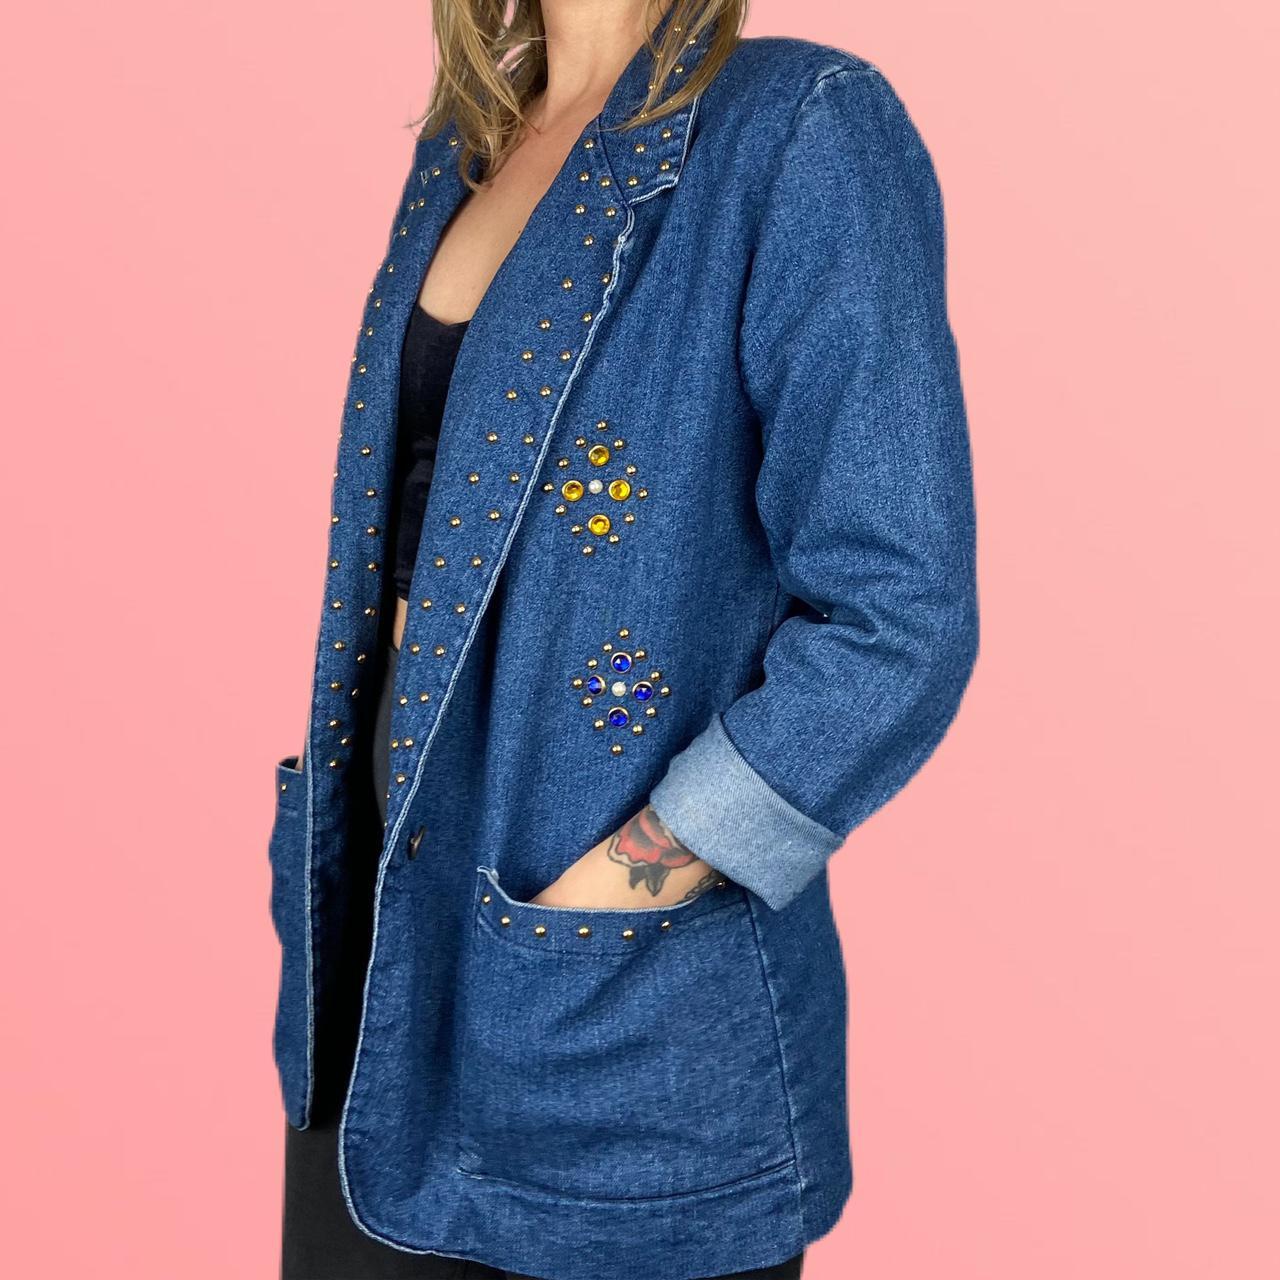 American Vintage Women's Blue and Gold Jacket